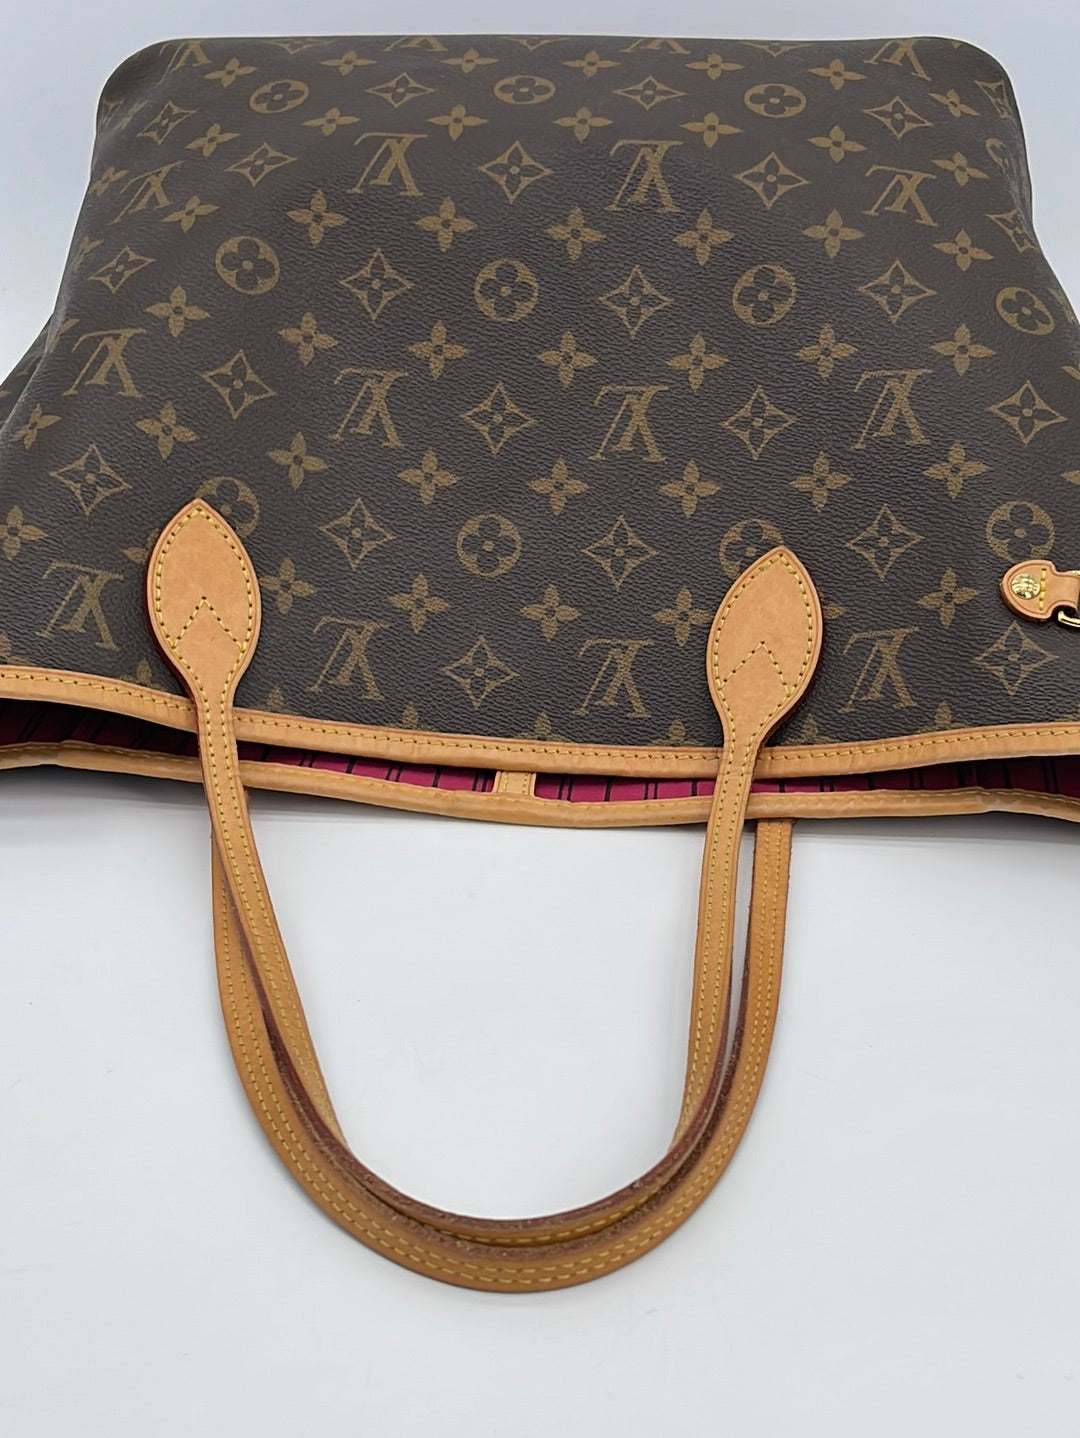 Authentic LOUIS VUITTON Neverfull MM Monogram Red Ikat Tote Bag Purse  #35874